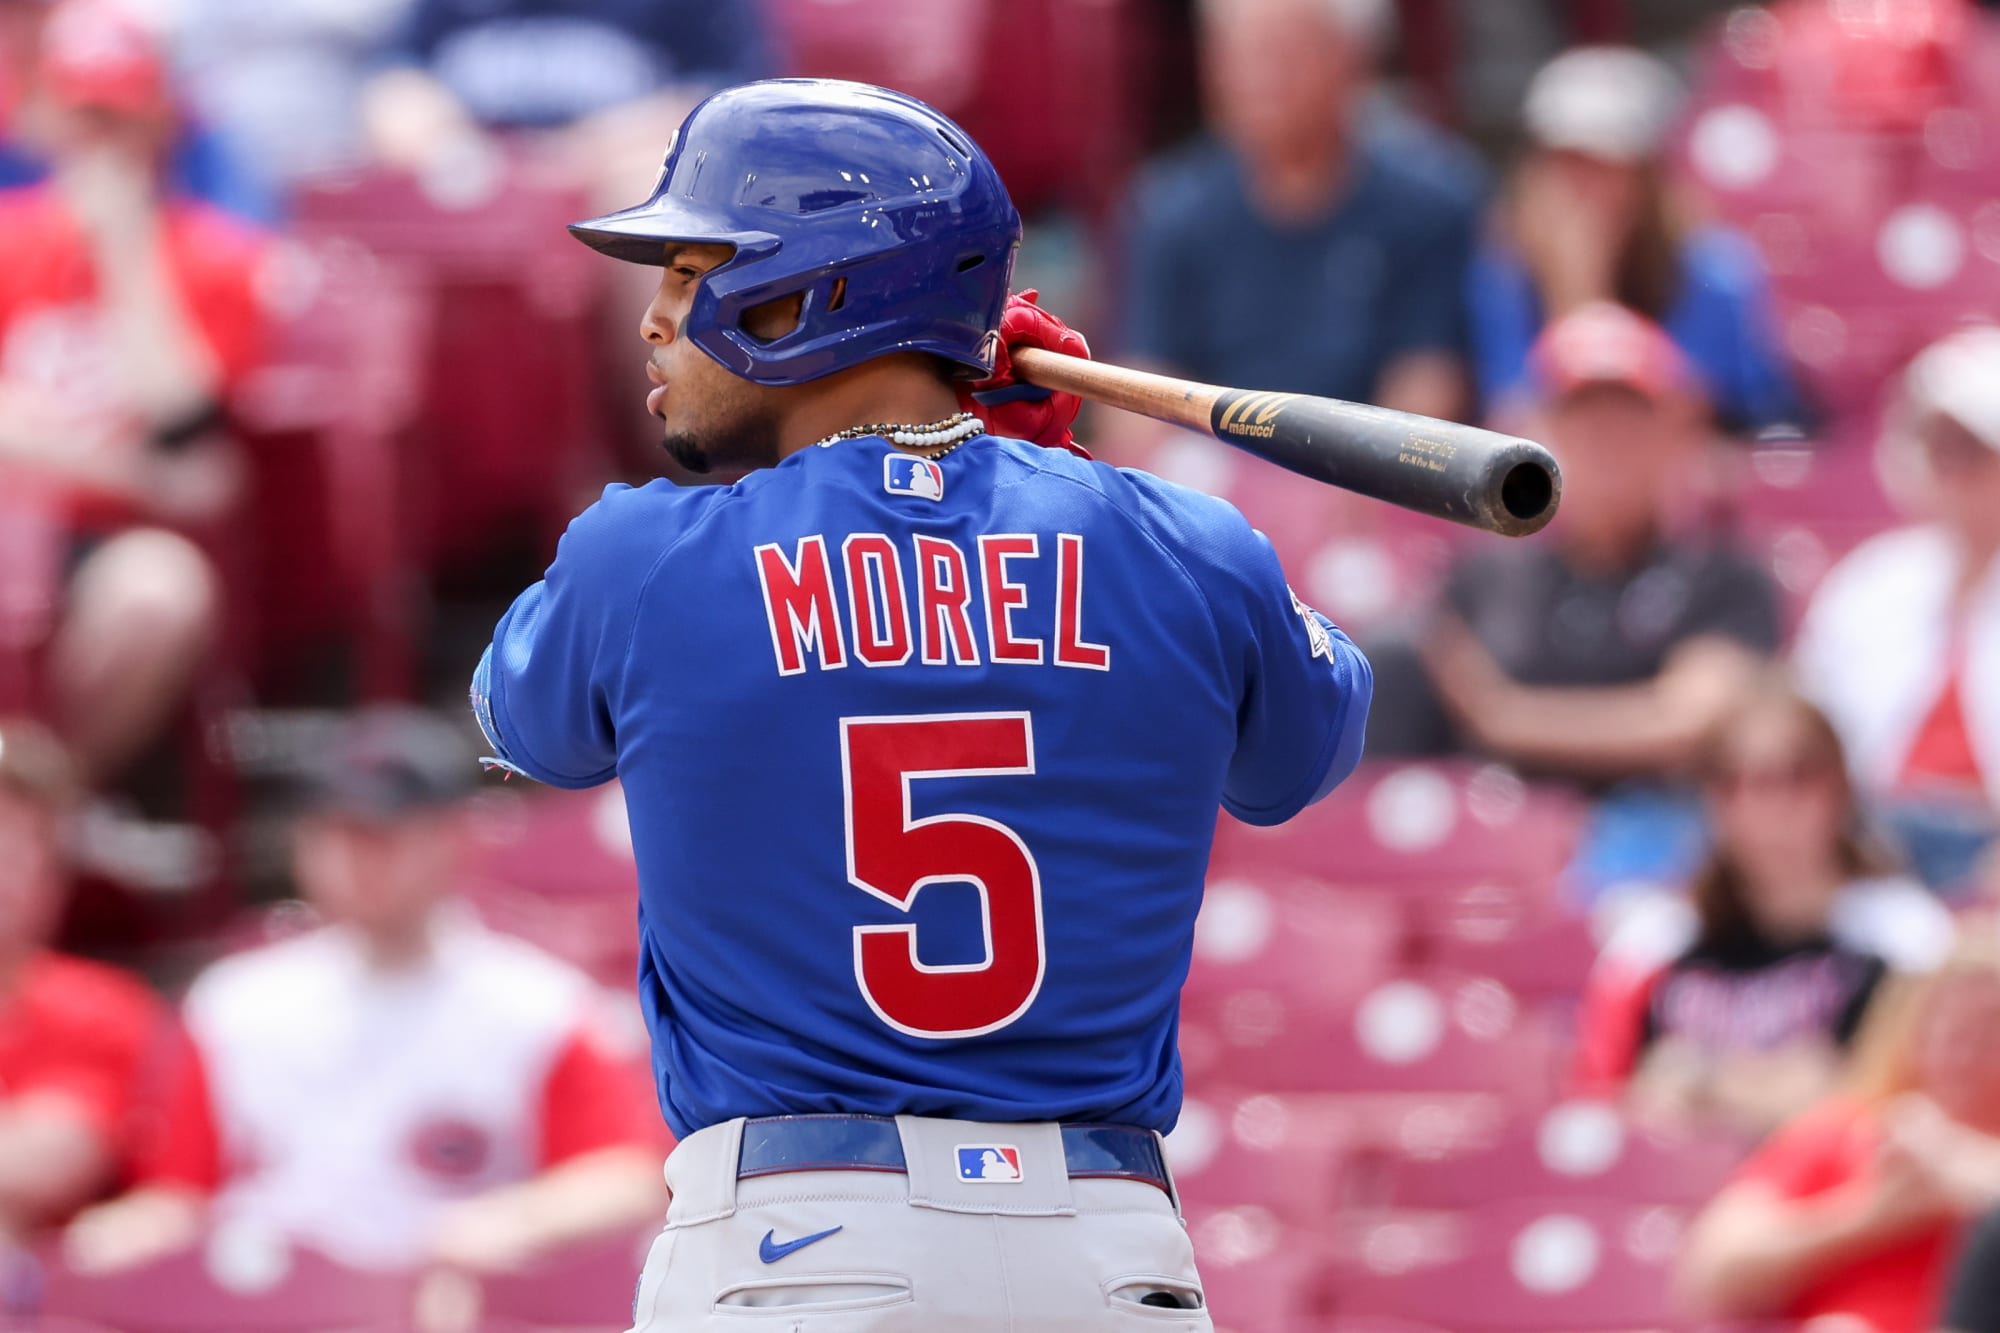 Cubs Christopher Morel is one of the hottest rookies in the league